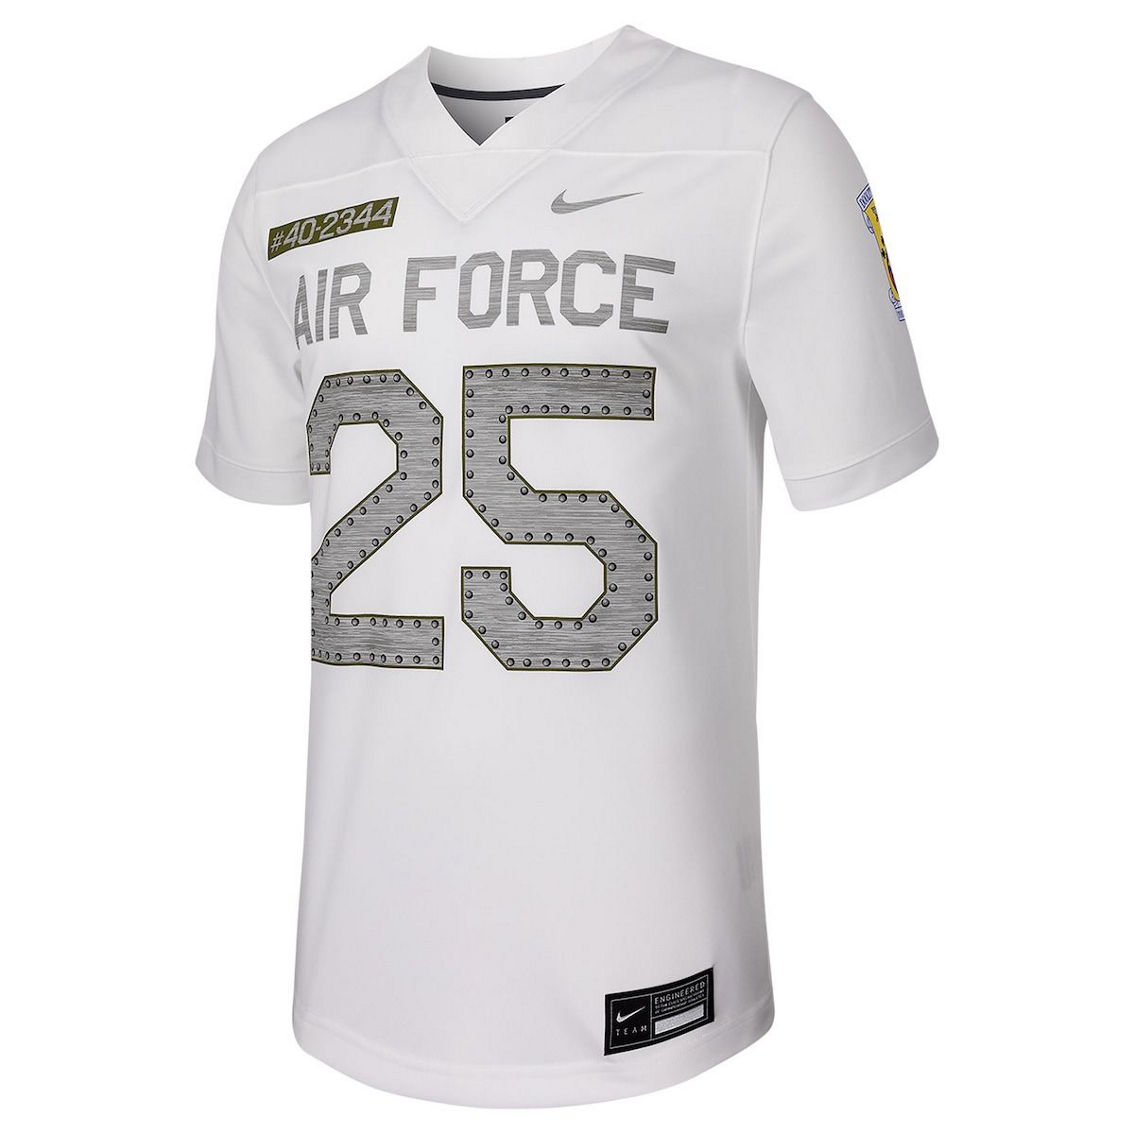 Nike Men's #25 White Air Force Falcons Untouchable Football Replica Jersey - Image 3 of 4